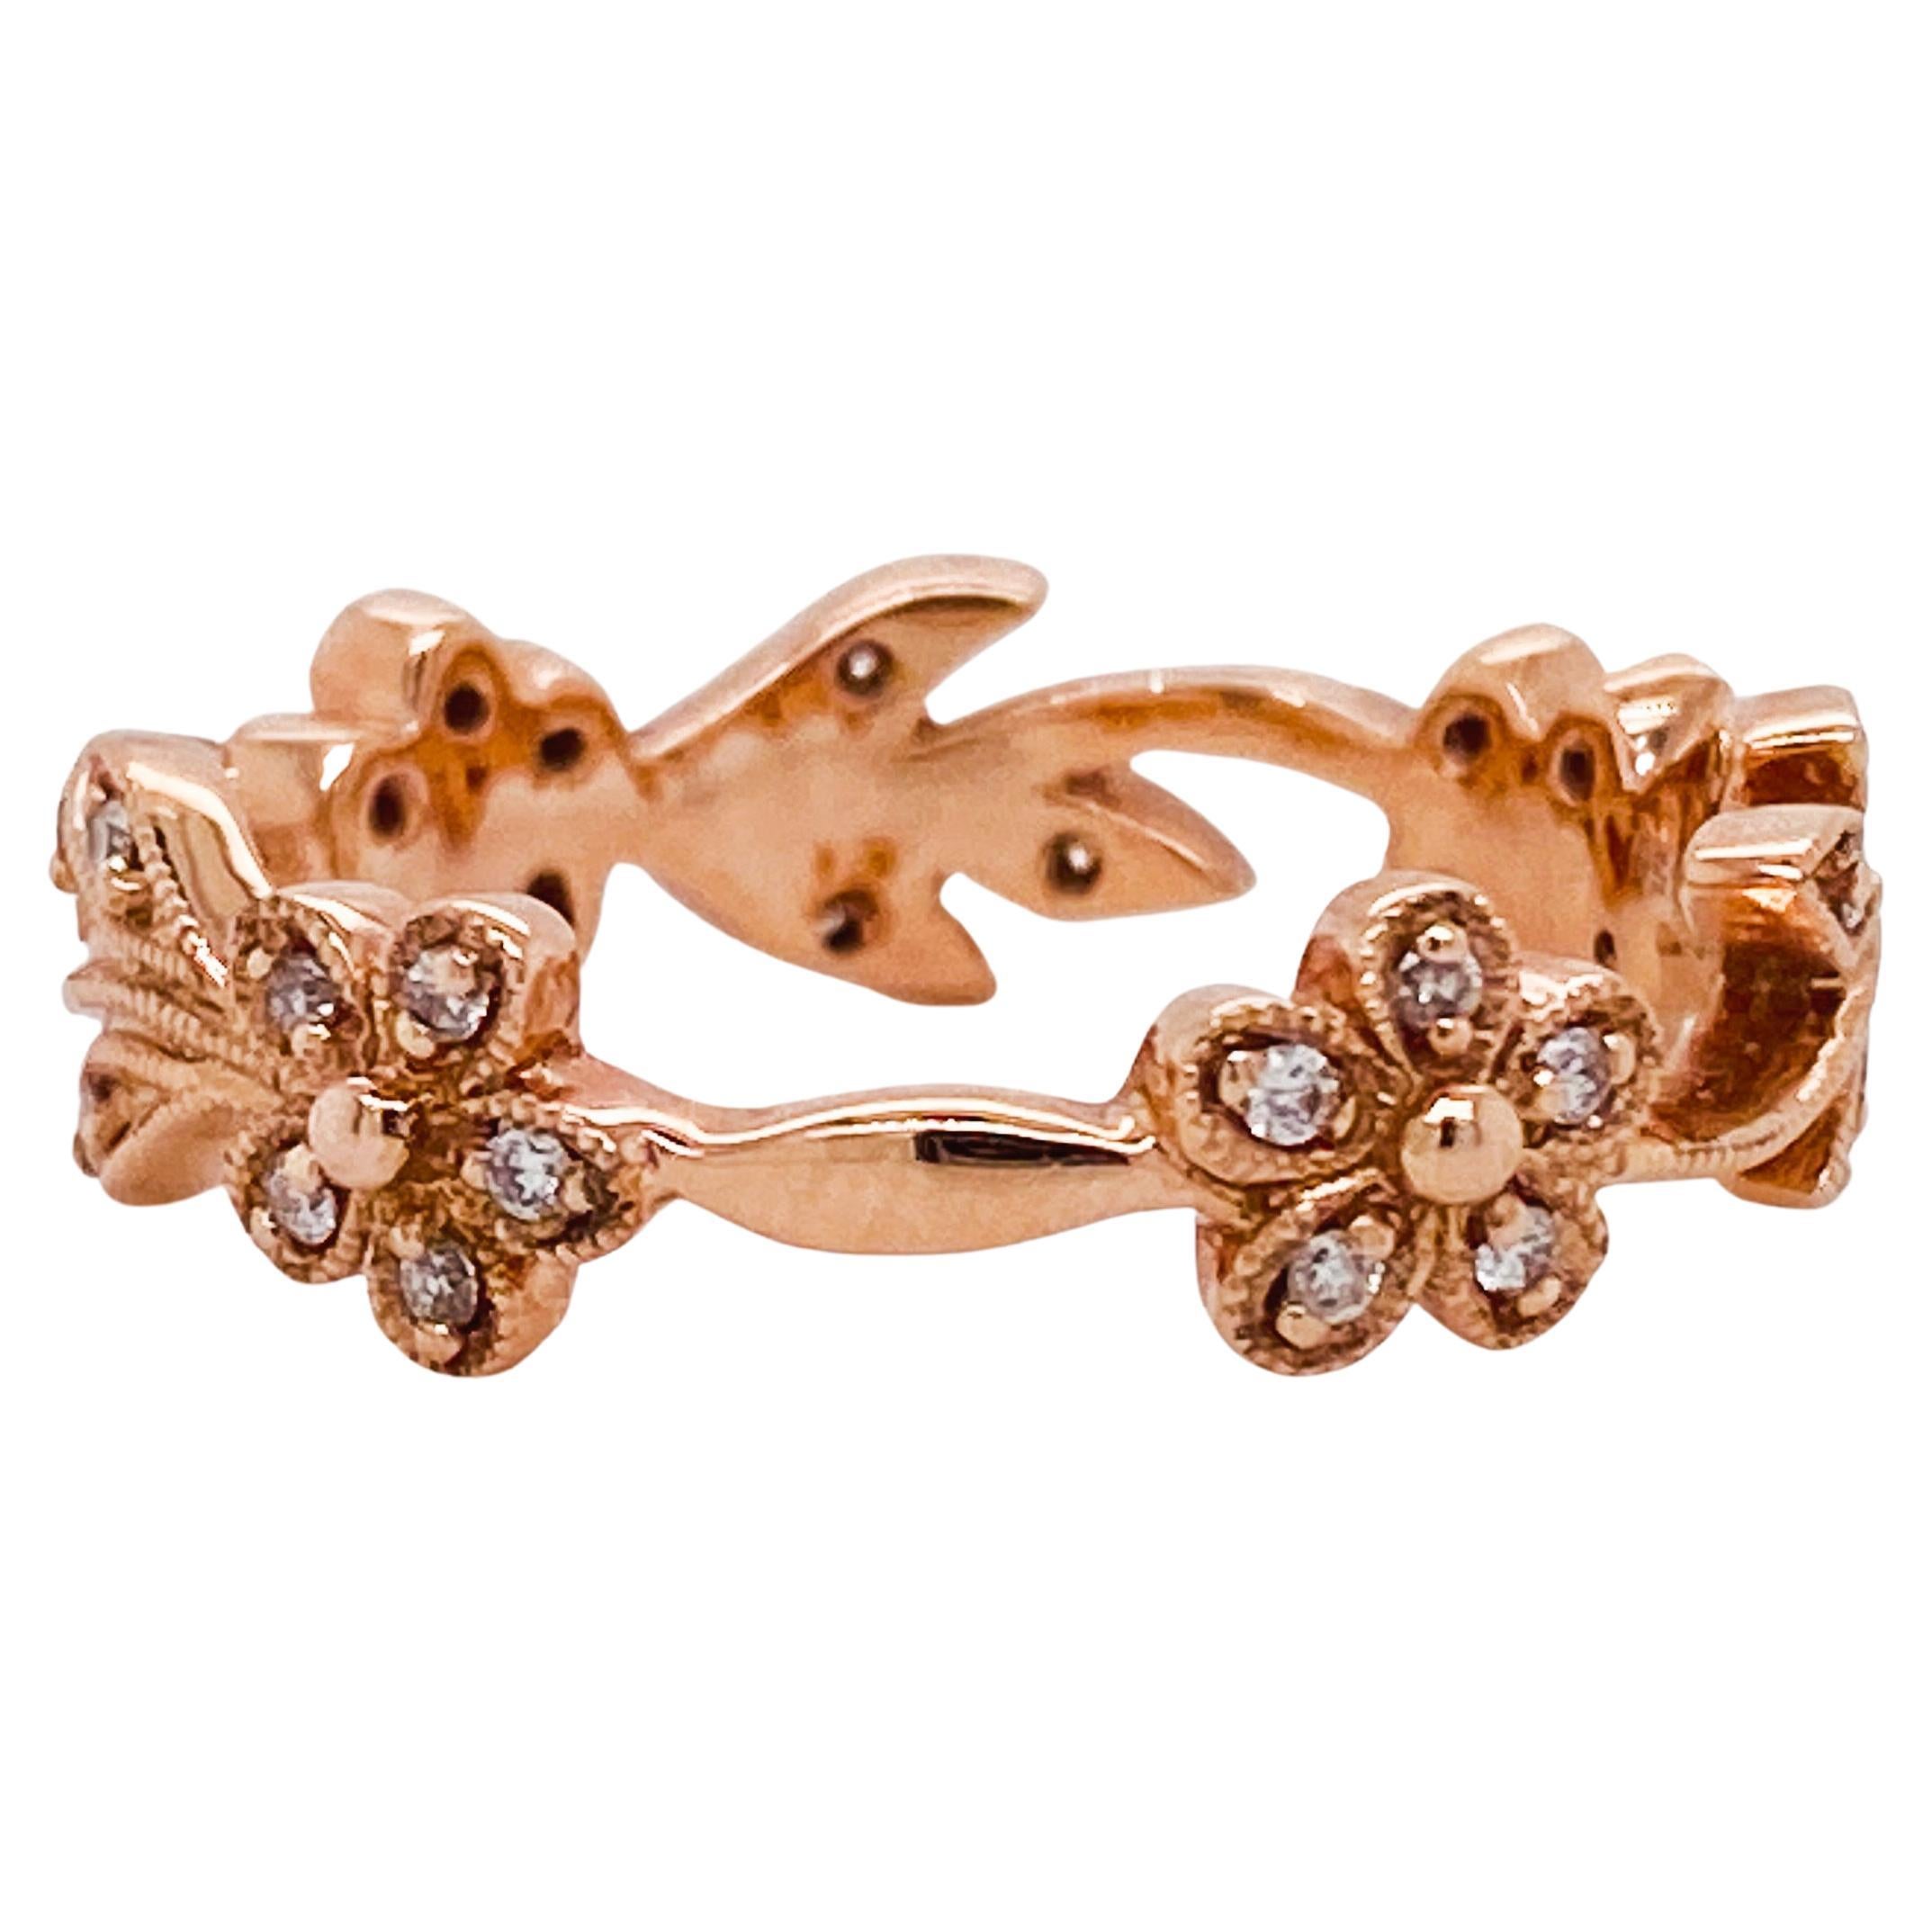 Flower Diamond Band in Rose Gold W 25 Diamonds in a Floral Design SZ 6.5 sizable For Sale